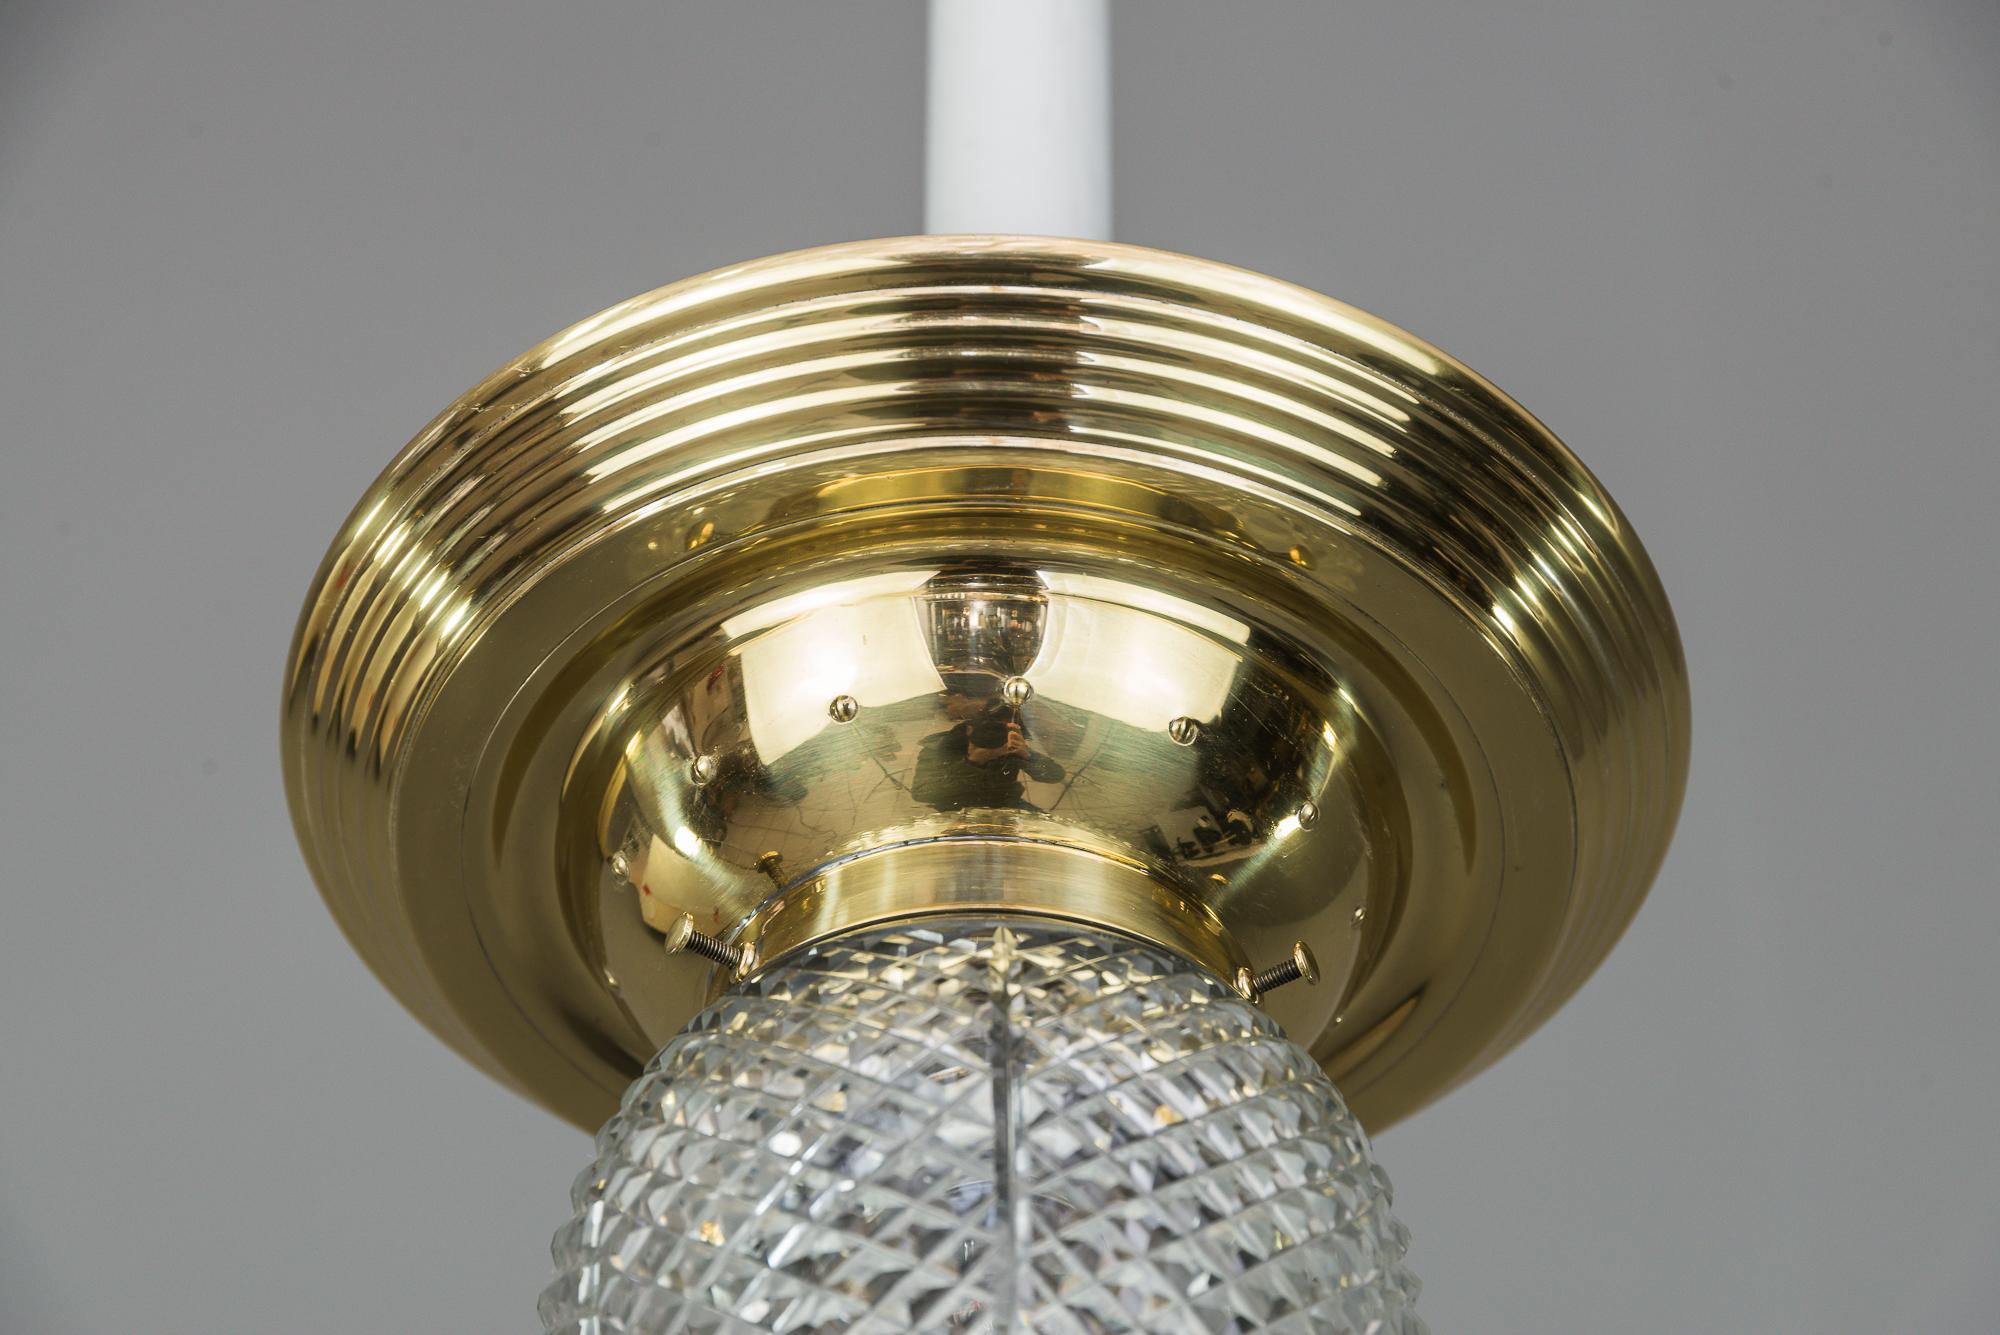 Lacquered Jugendstil Ceiling Lamp with Original Cut Glass, circa 1908